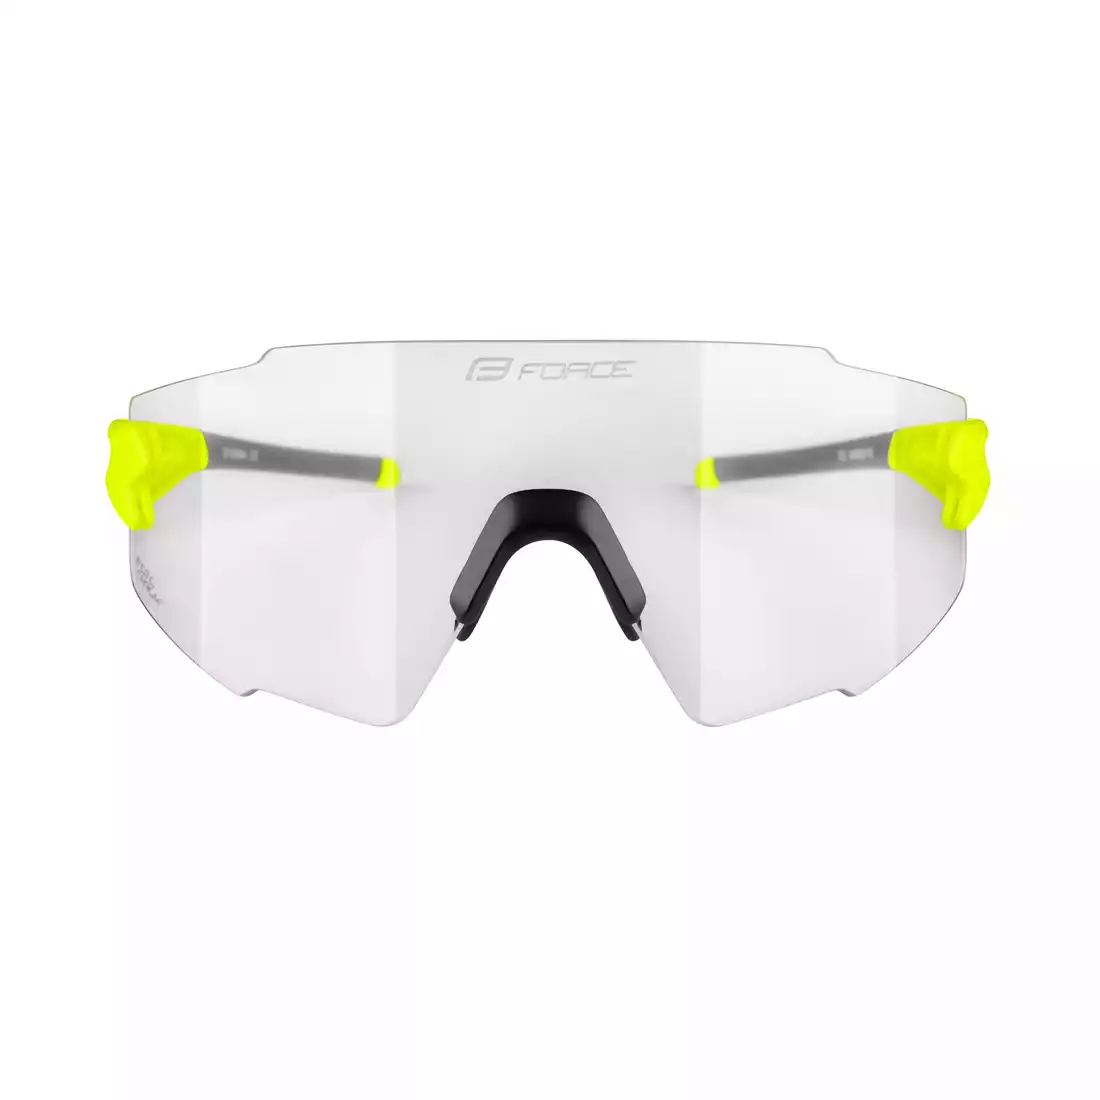 FORCE MANTRA Photochromic sports glasses, fluo